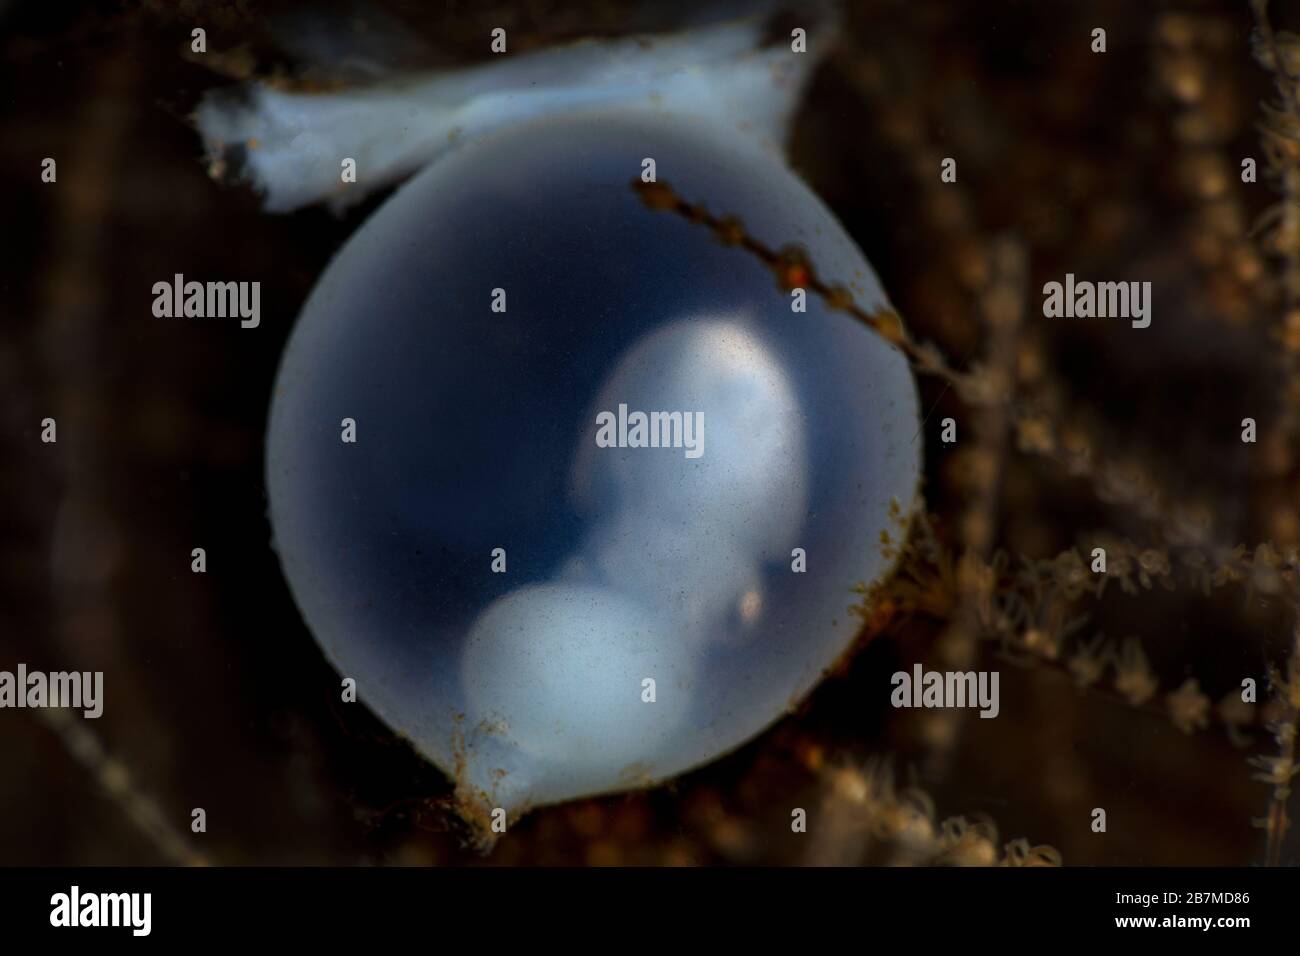 A new life is emerging. Cuttlefish egg with embryo. Underwater macro photography from Tulamben, Bali,  Indonesia Stock Photo